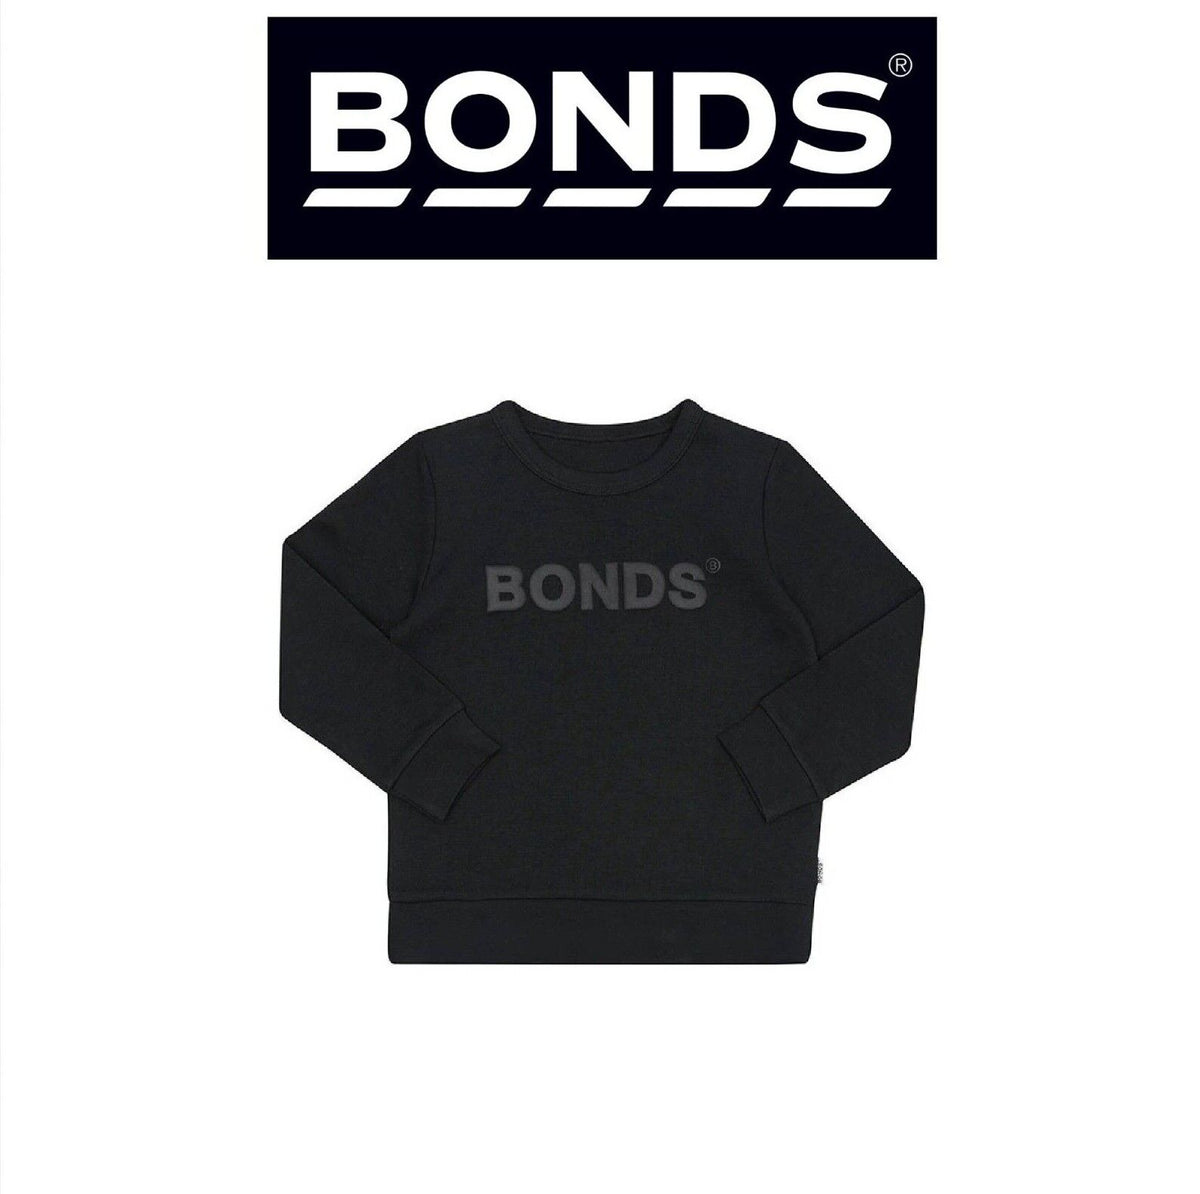 Bonds Baby Tech Sweats Pullover Ultimate Warm Comfort with Sporty Styling KVQTA